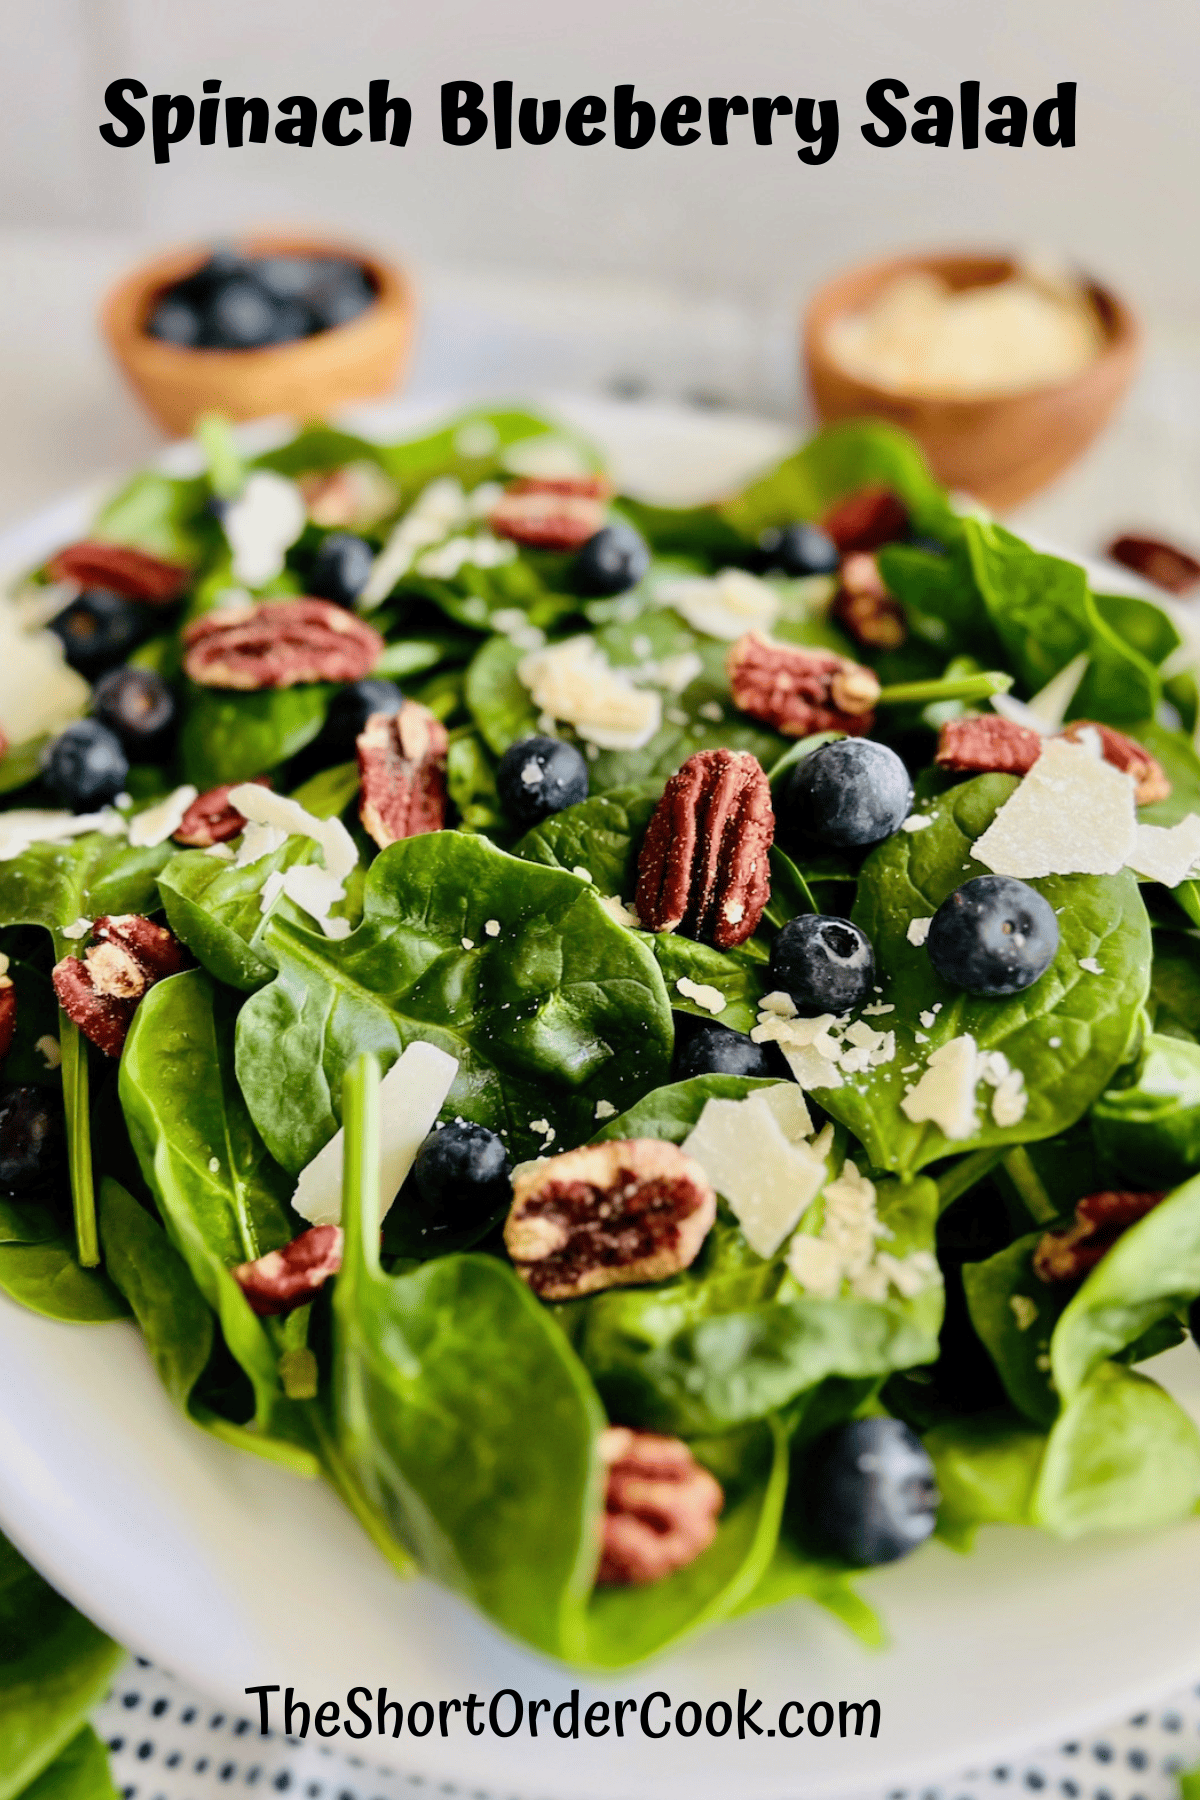 Spinach blueberry salad with olive oil & vinegar dressing.